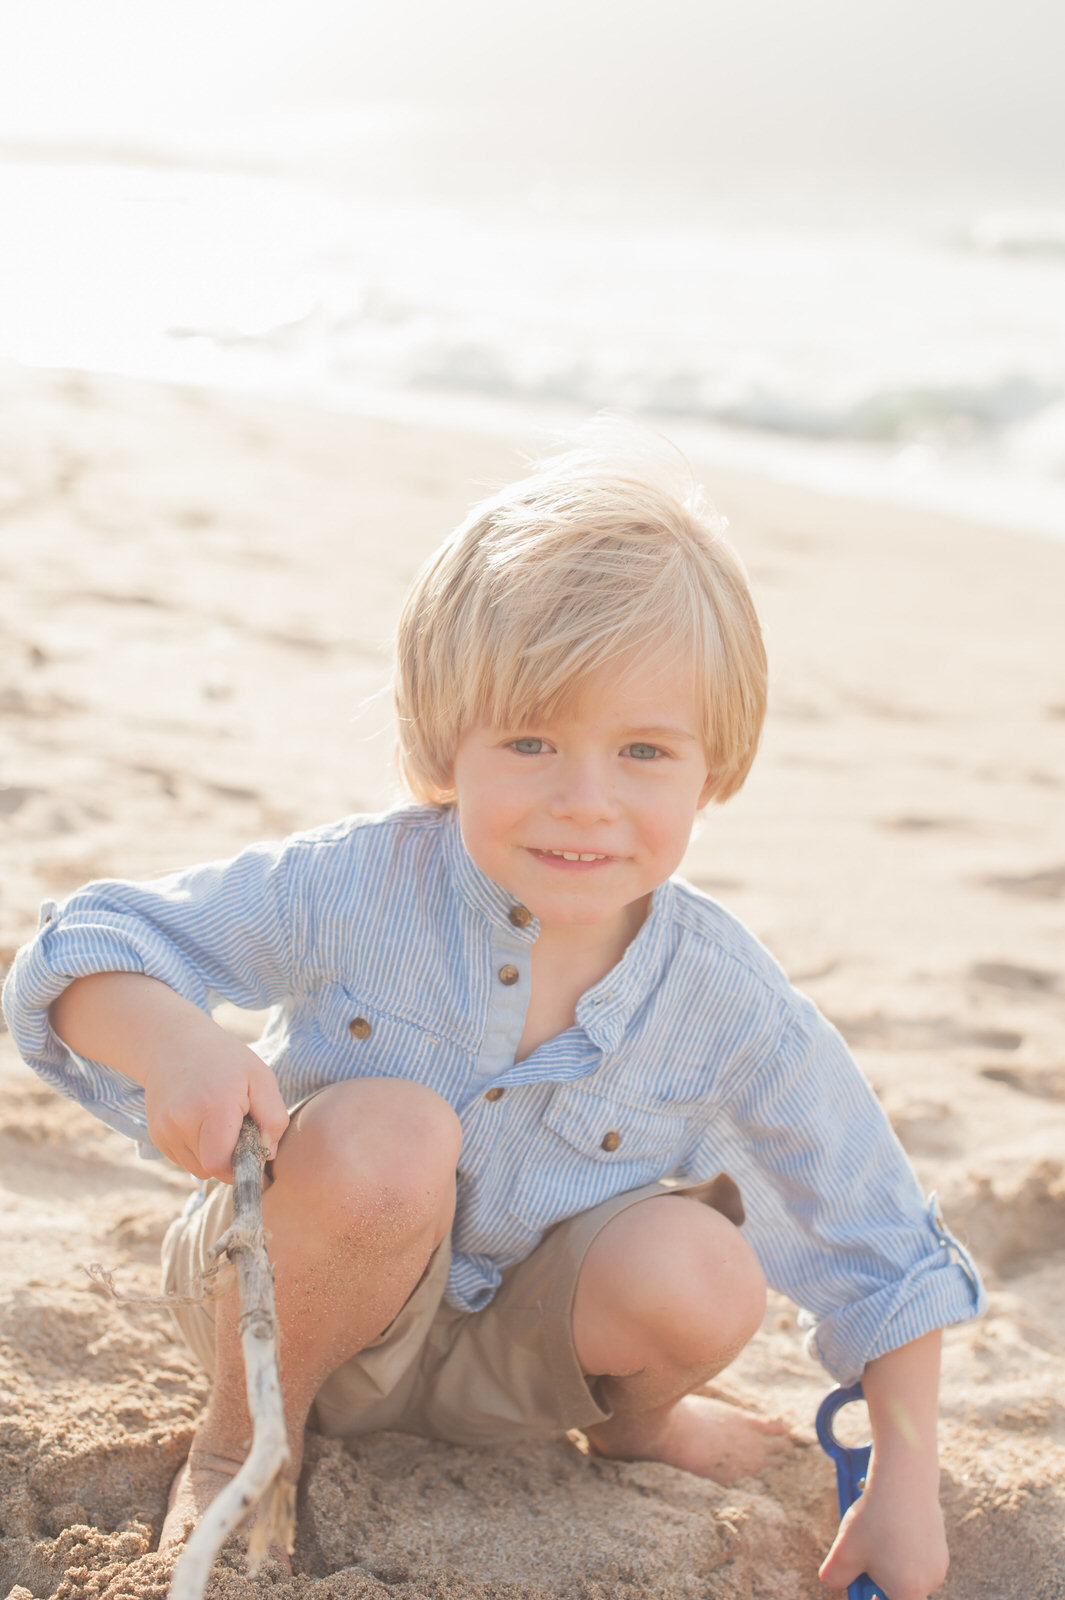 Find Maui’s Top Family Photographers for Portraits in Hawaii